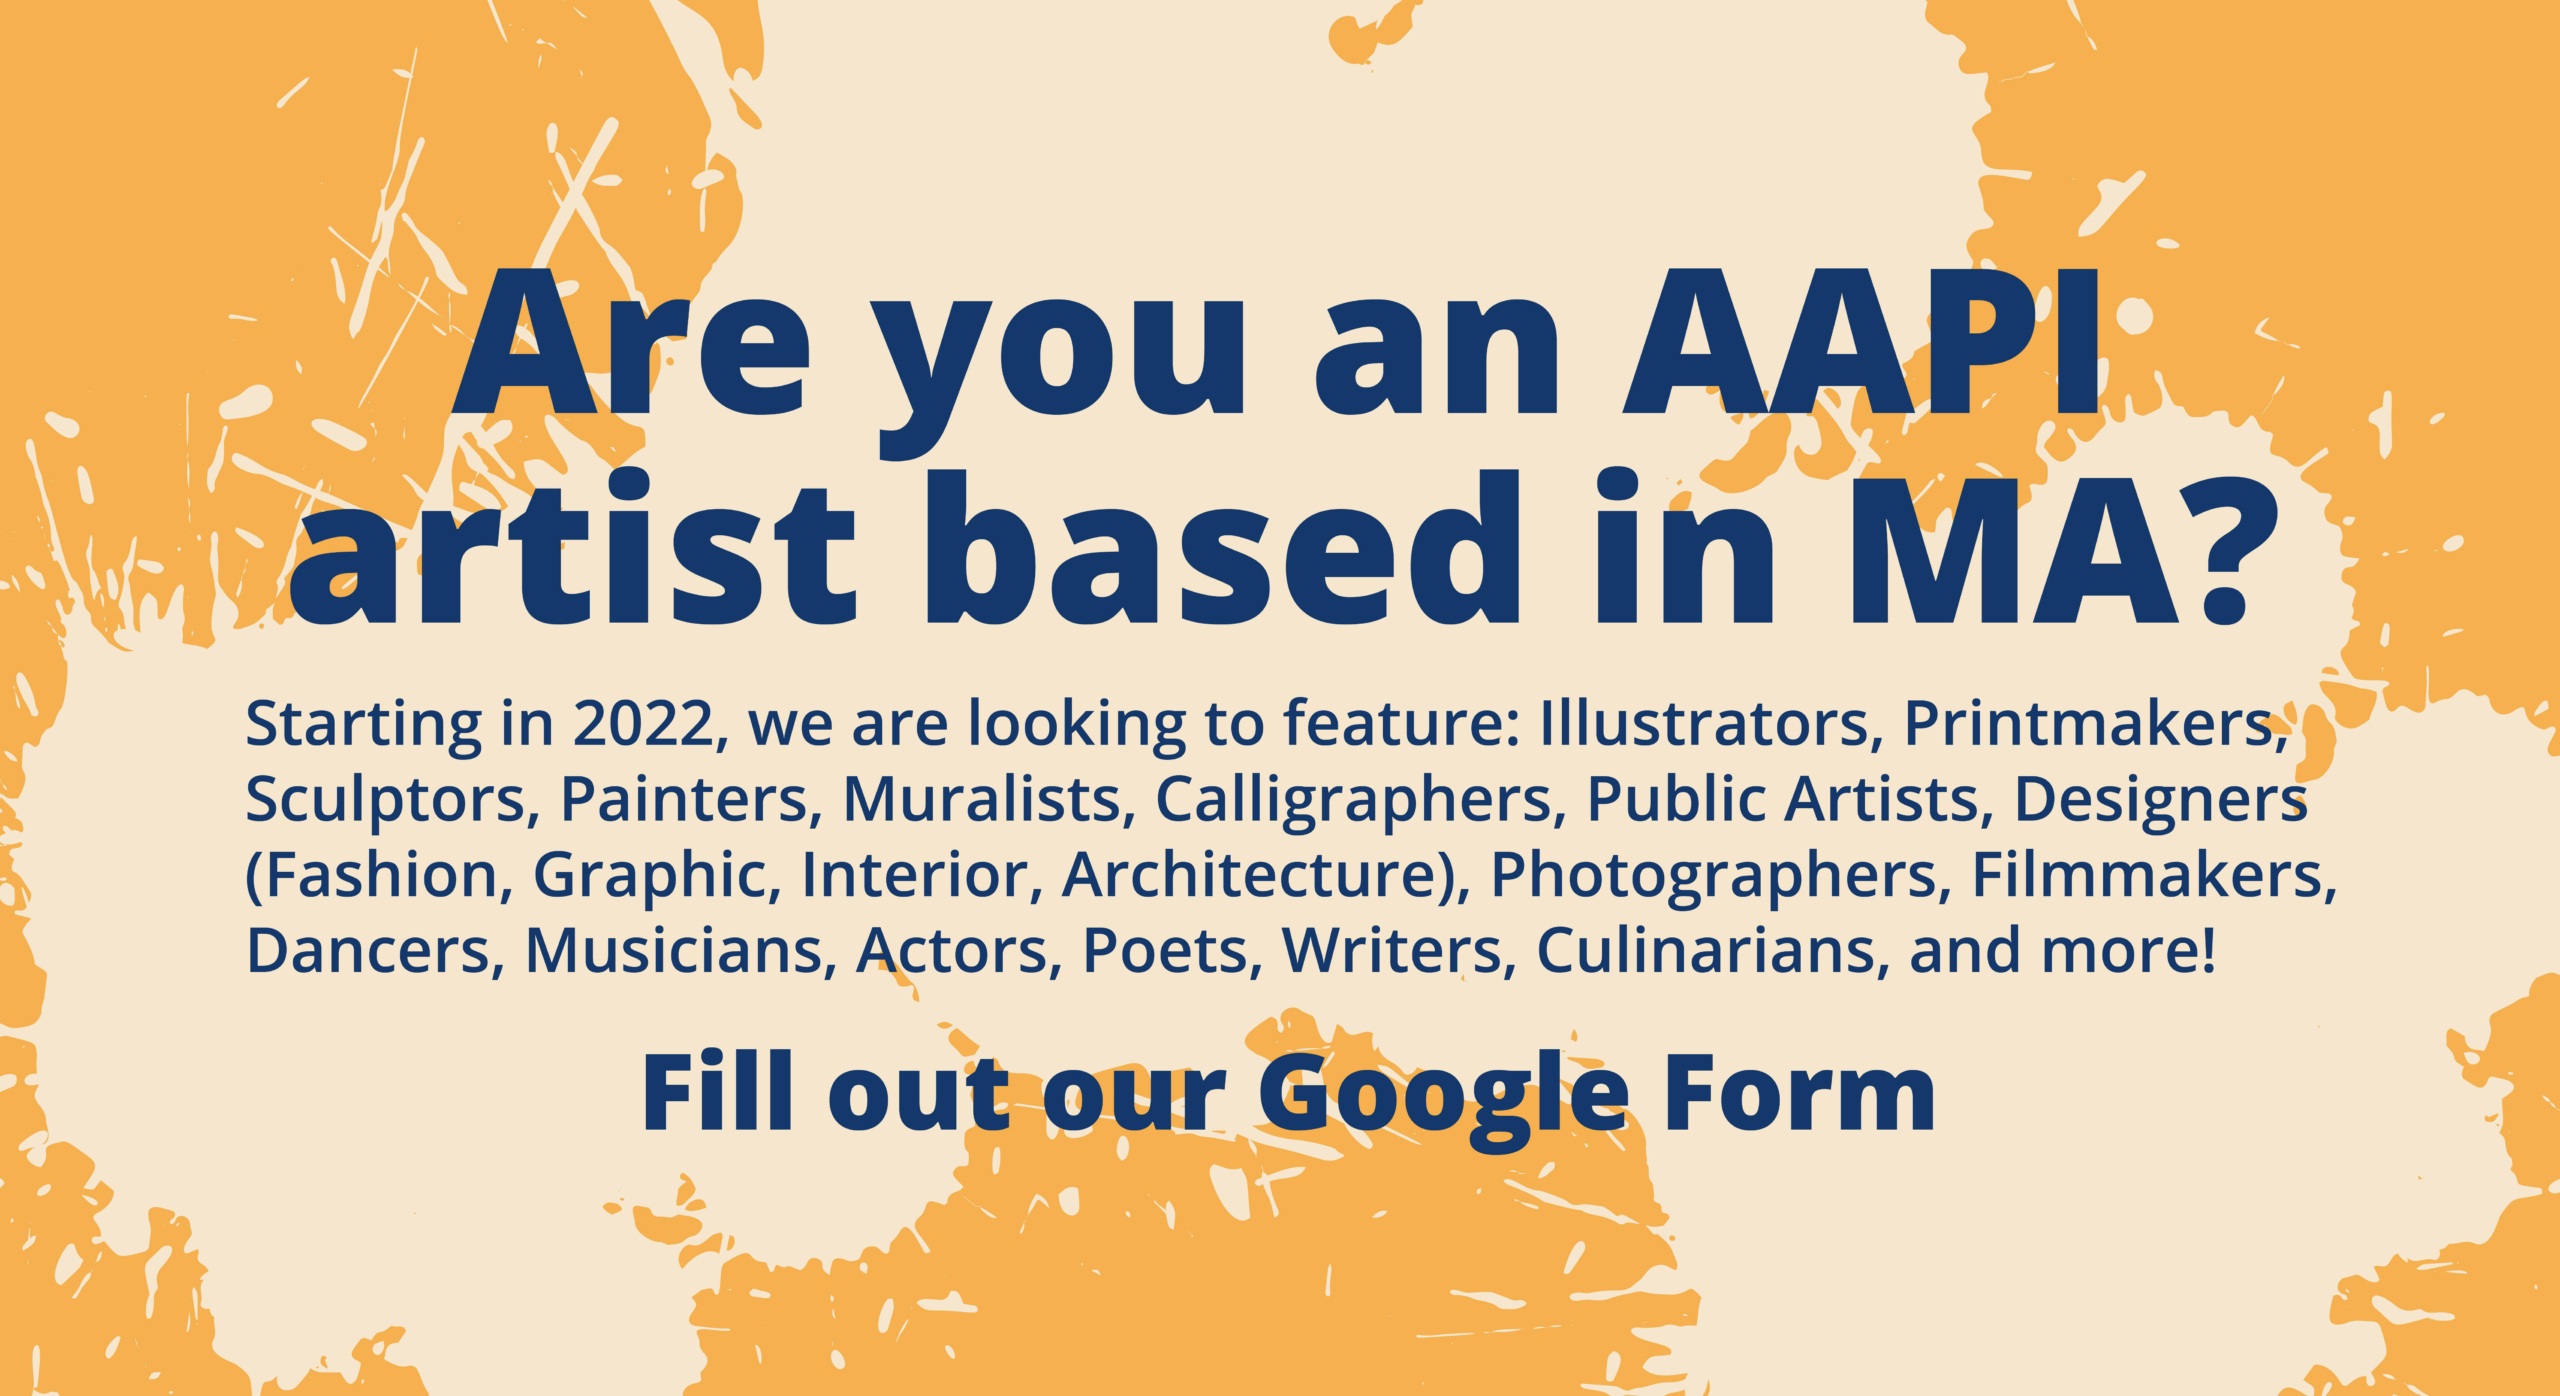 Attention AAPI Artists in MA: Sign Up to be Featured